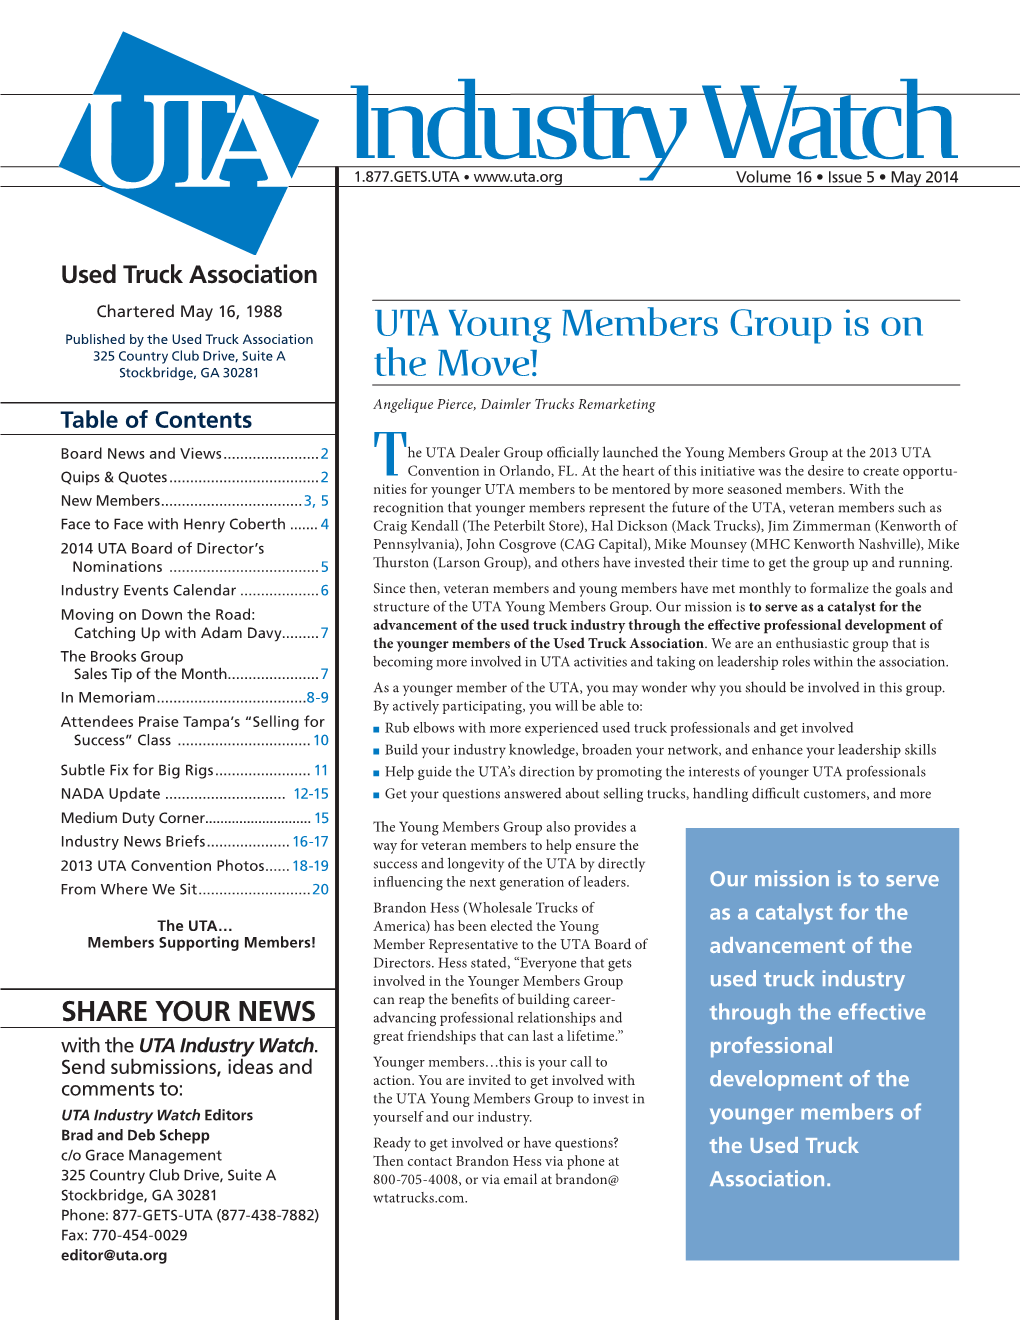 UTA Young Members Group Is on the Move!